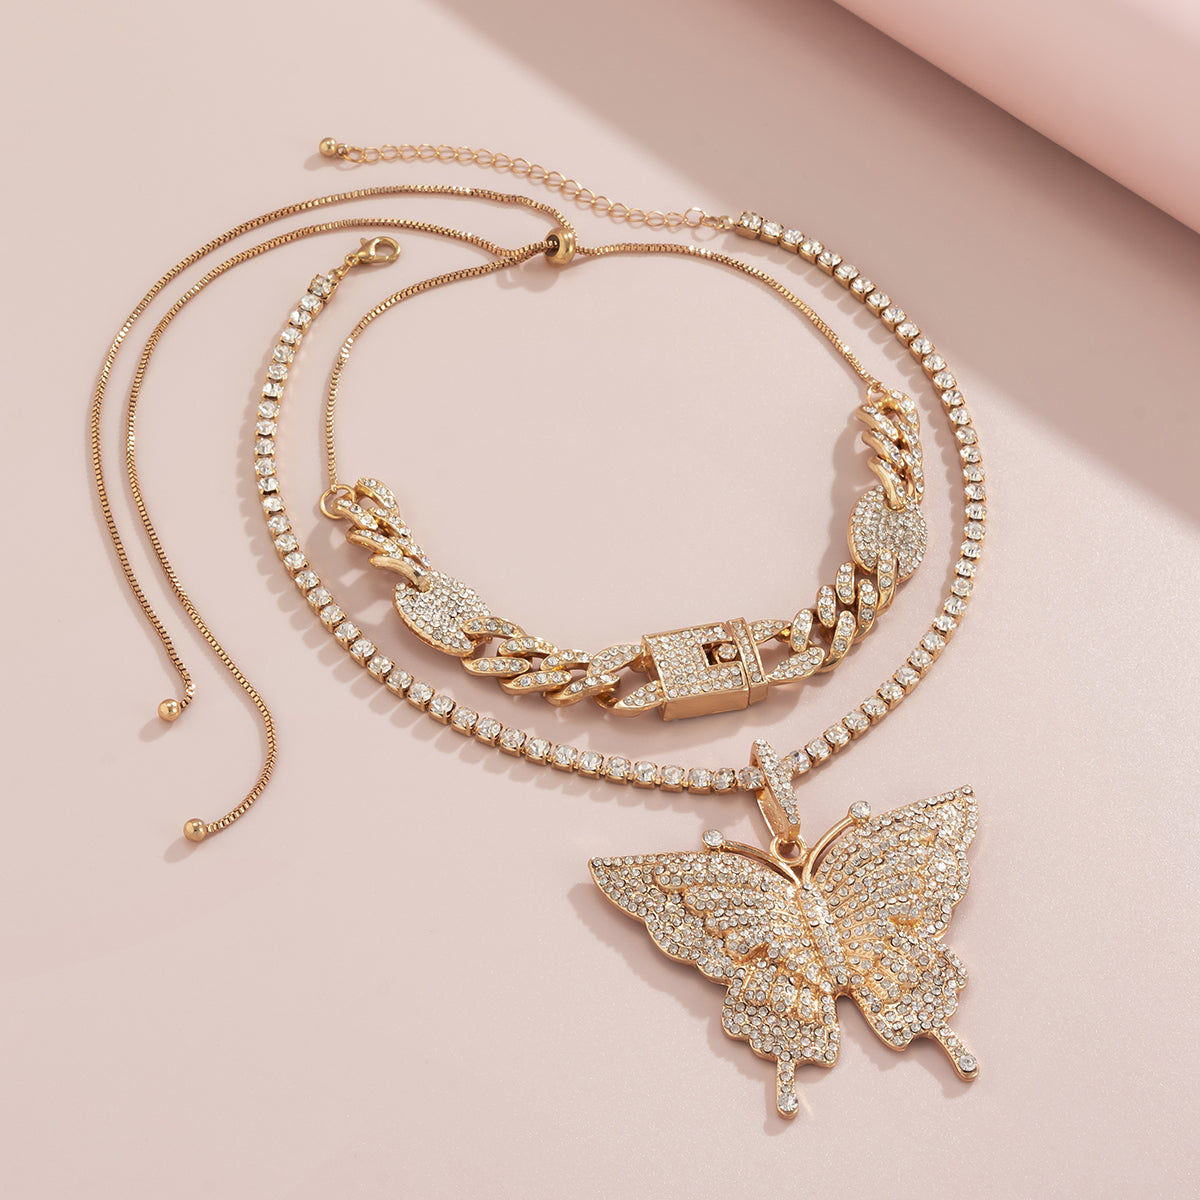 Cubic Zirconia & 18K Gold-Plated Butterfly Pendant Necklace Set